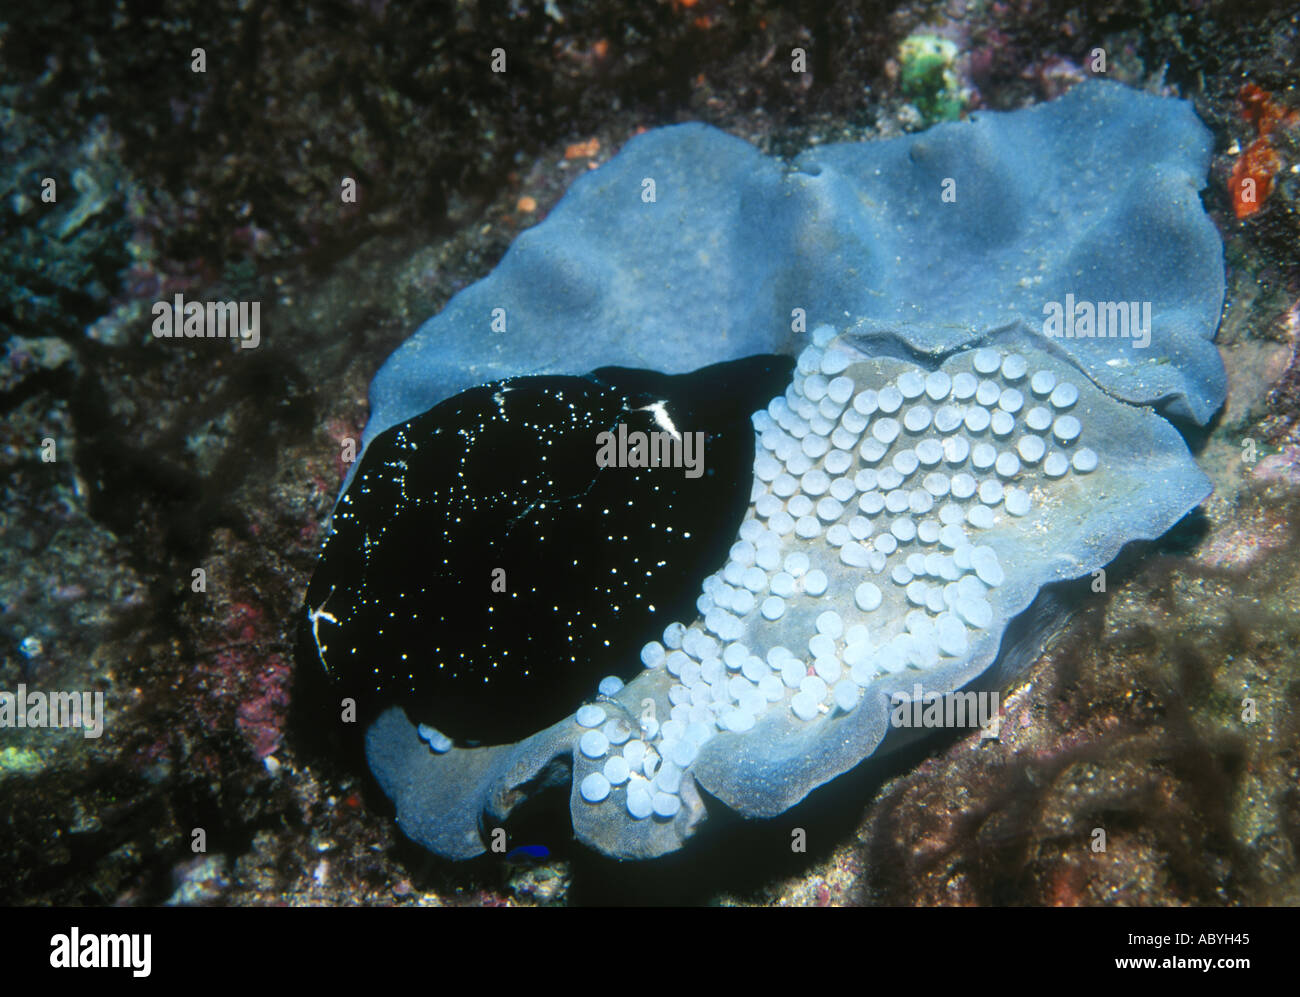 Egg Cowry, Ovula ovum, guarding her eggs laid on a leather coral Stock Photo